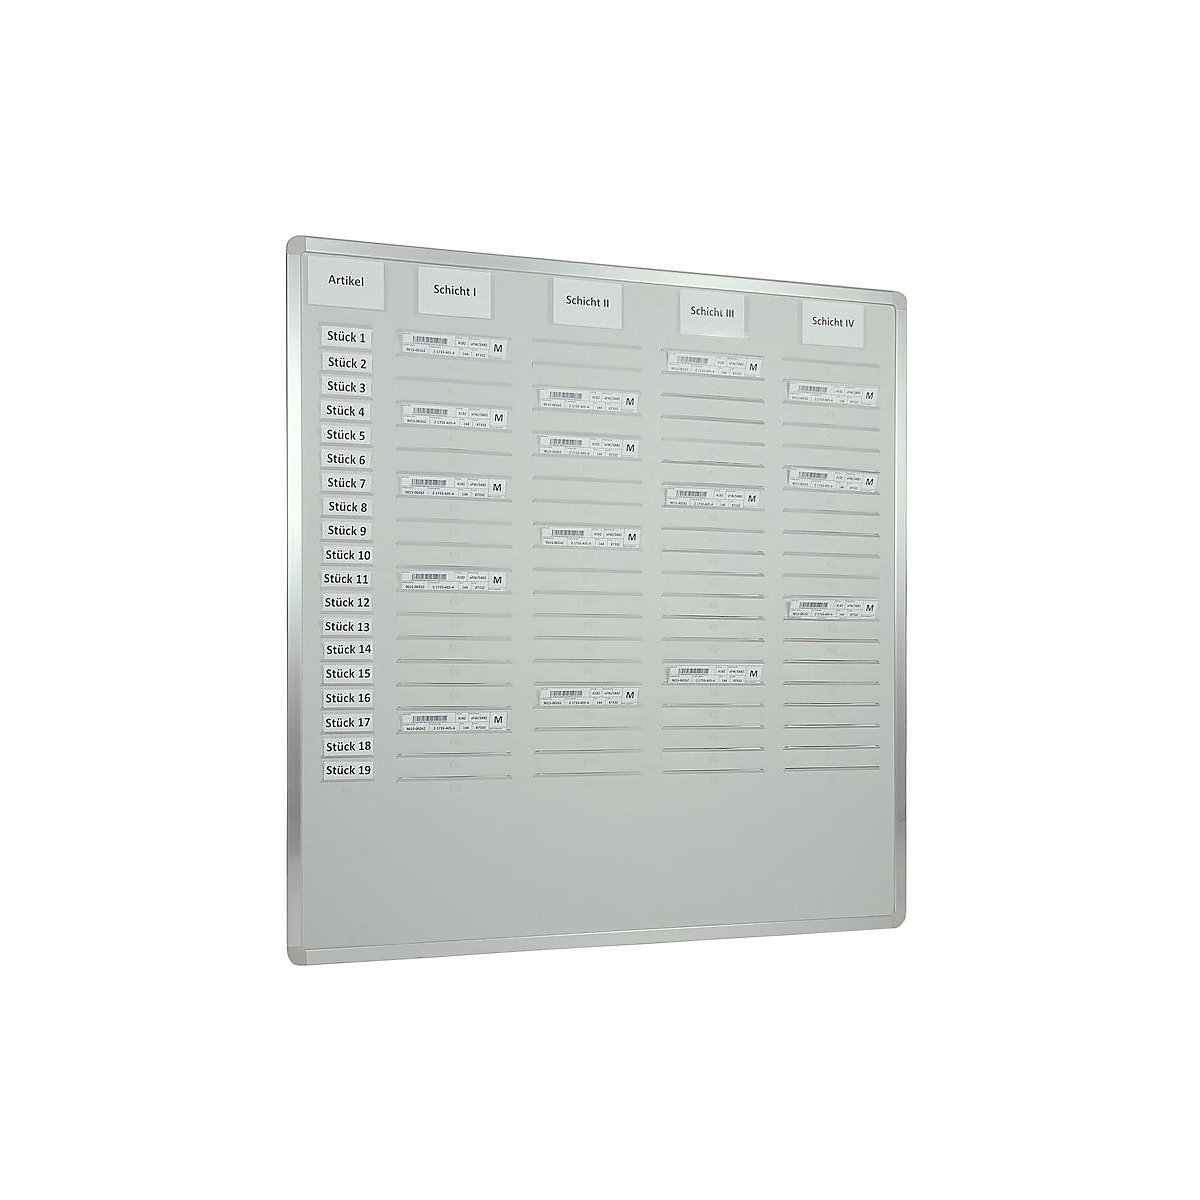 Orga Easy planning board – EICHNER, height 900 mm, for A5 vertical, width 915 mm, four row-4